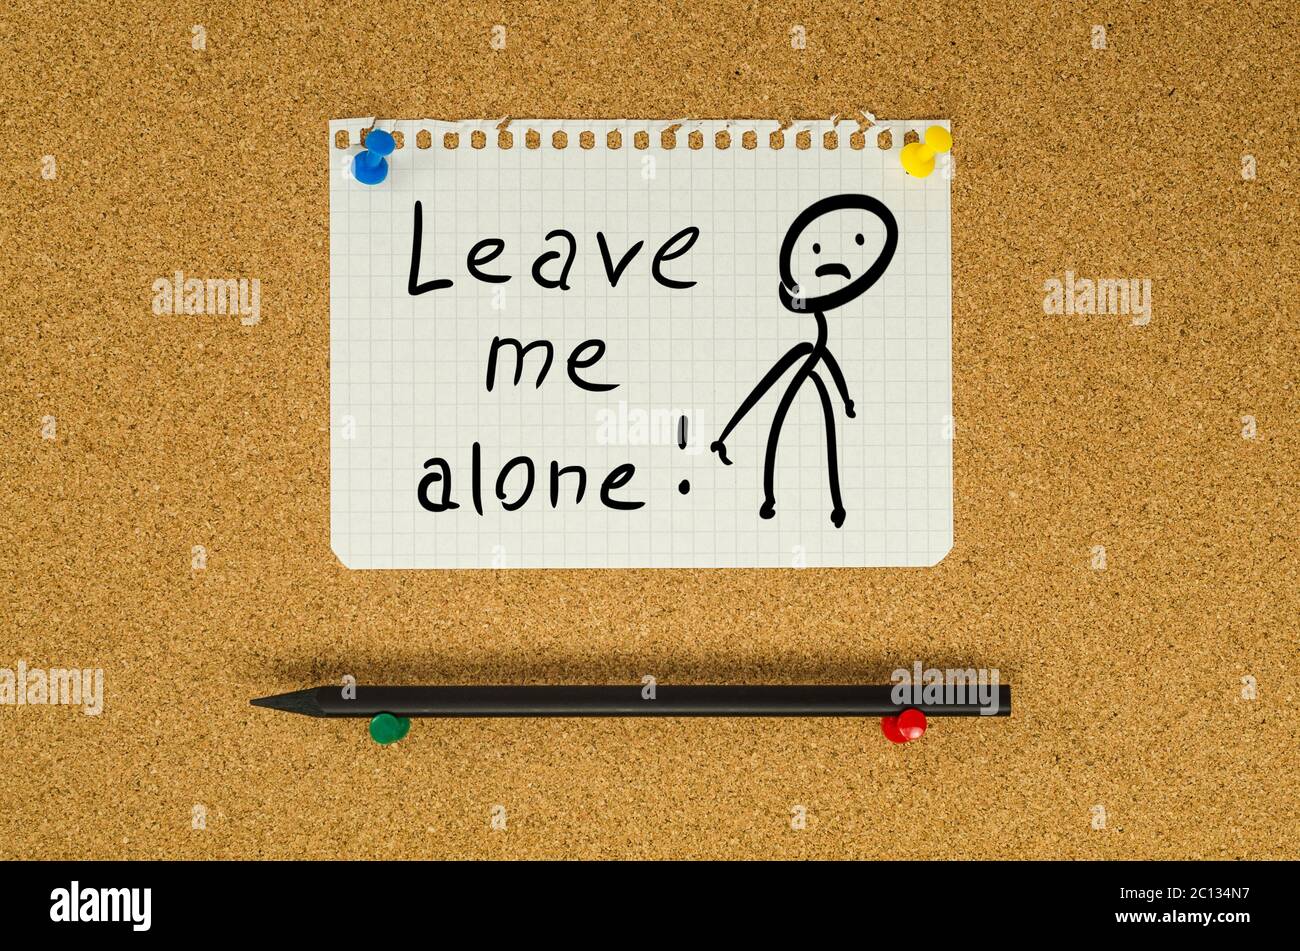 Leave me alone text note message pin on bulletin board Stock Photo ...